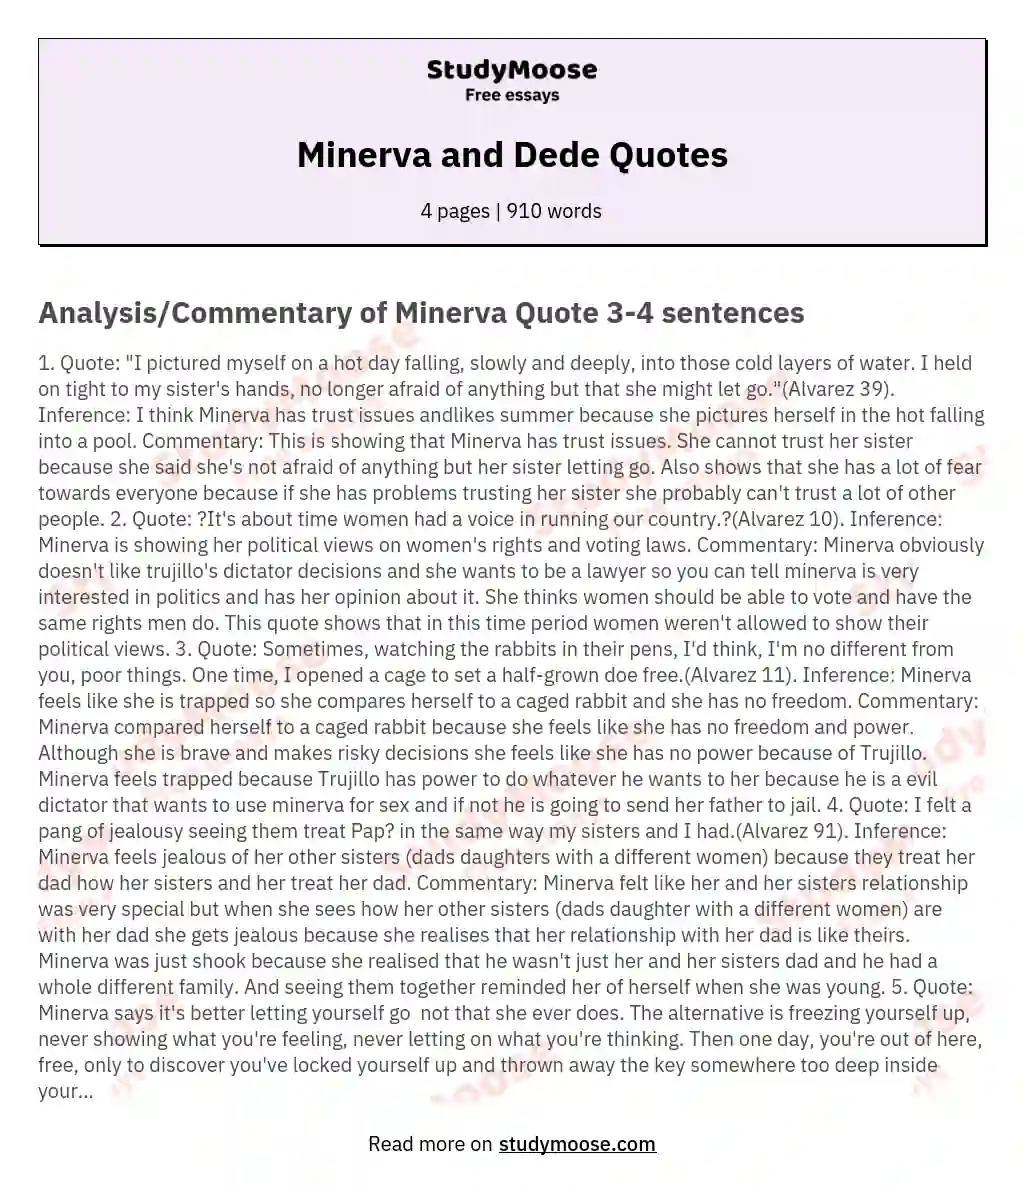 Minerva and Dede Quotes